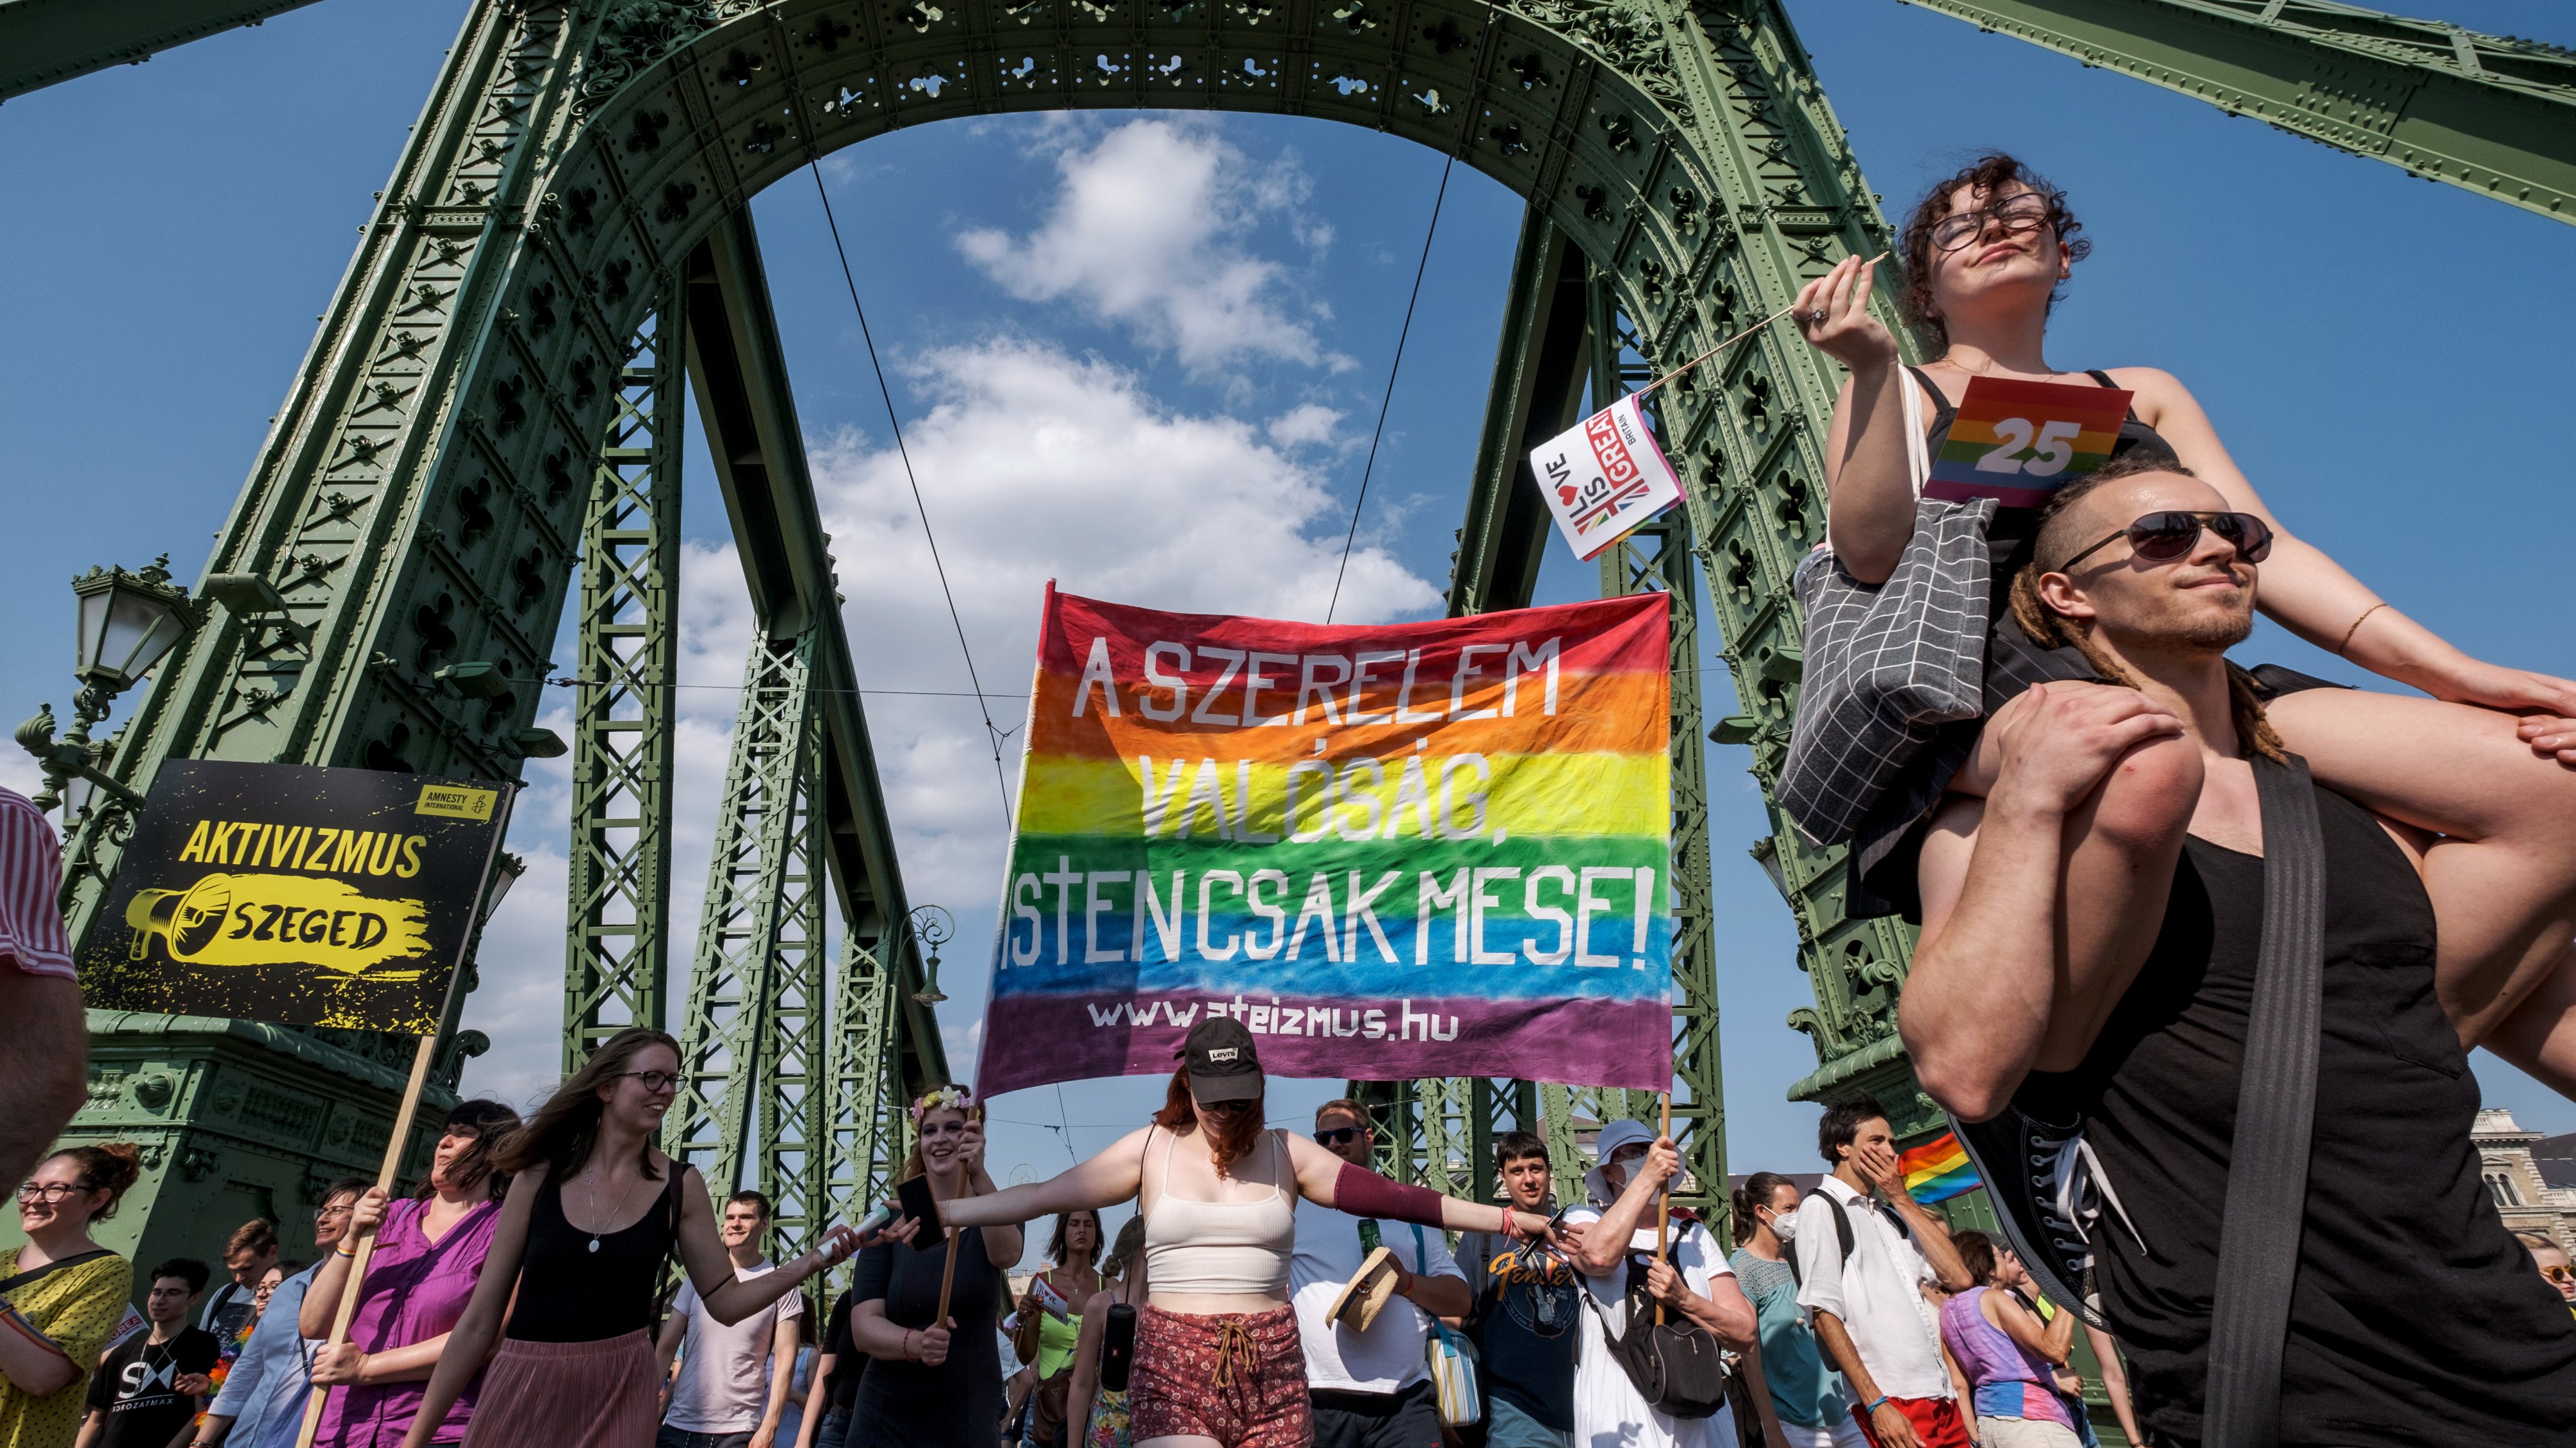 Budapest Pride March Takes Place Against A Backdrop Of The Hungarian Government&#039;s Anti-LGBT Campaign